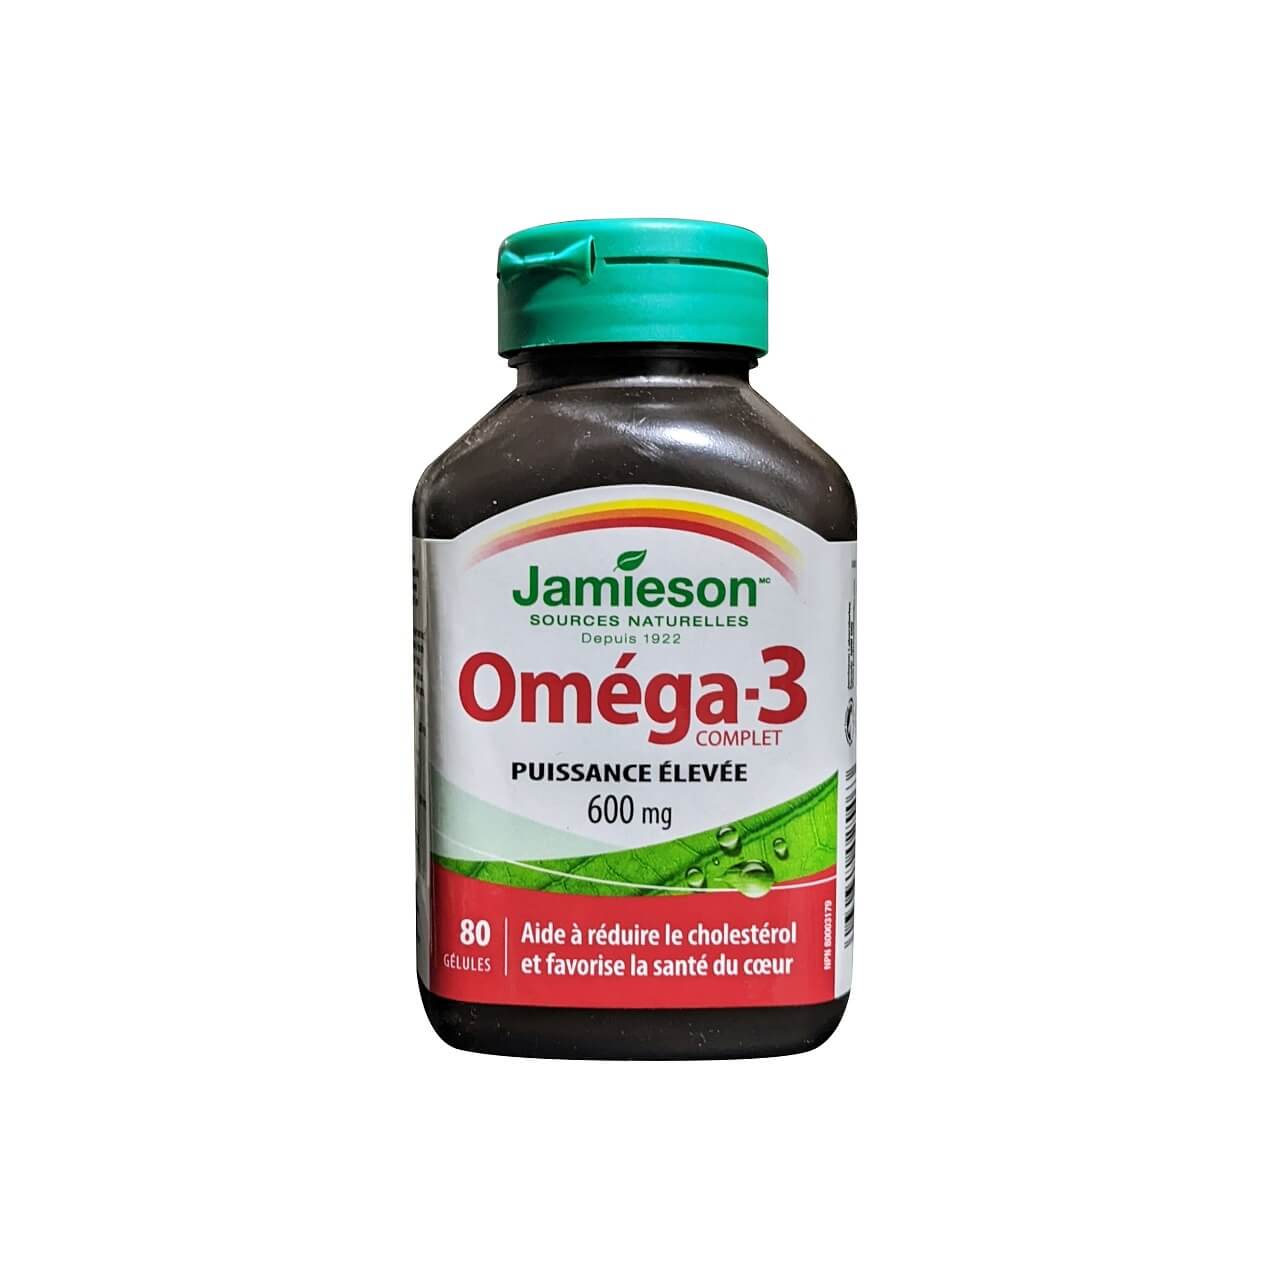 Product label for Jamieson Omega-3 Complete Extra Strength 600 mg (80 softgels) in French